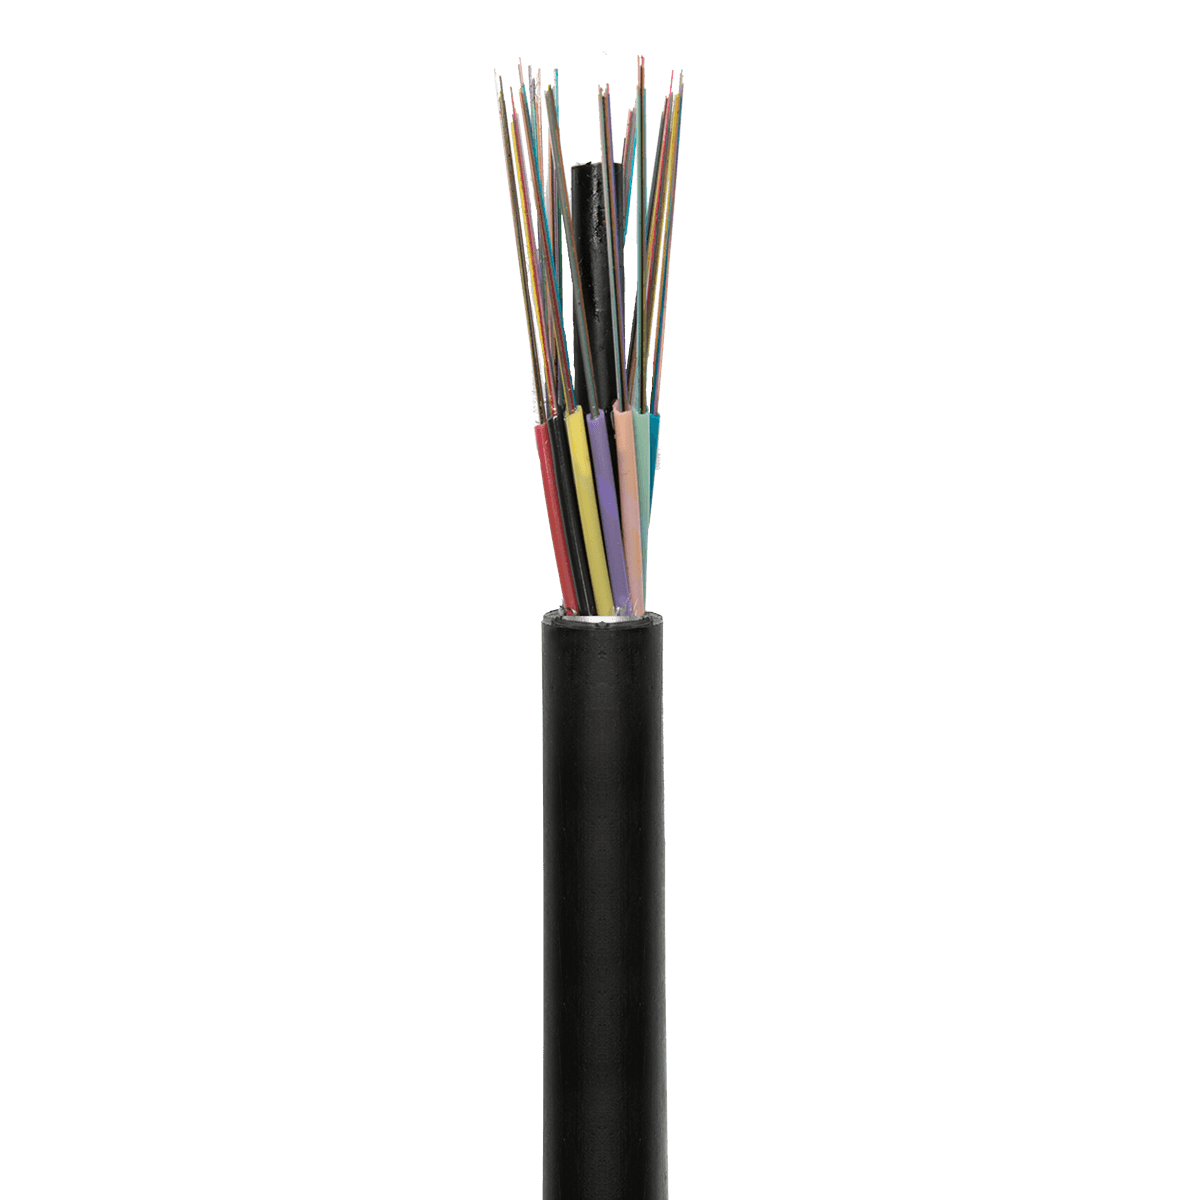 Stranded Loose Tube Non-metallic Stength Member Non-armored Cable